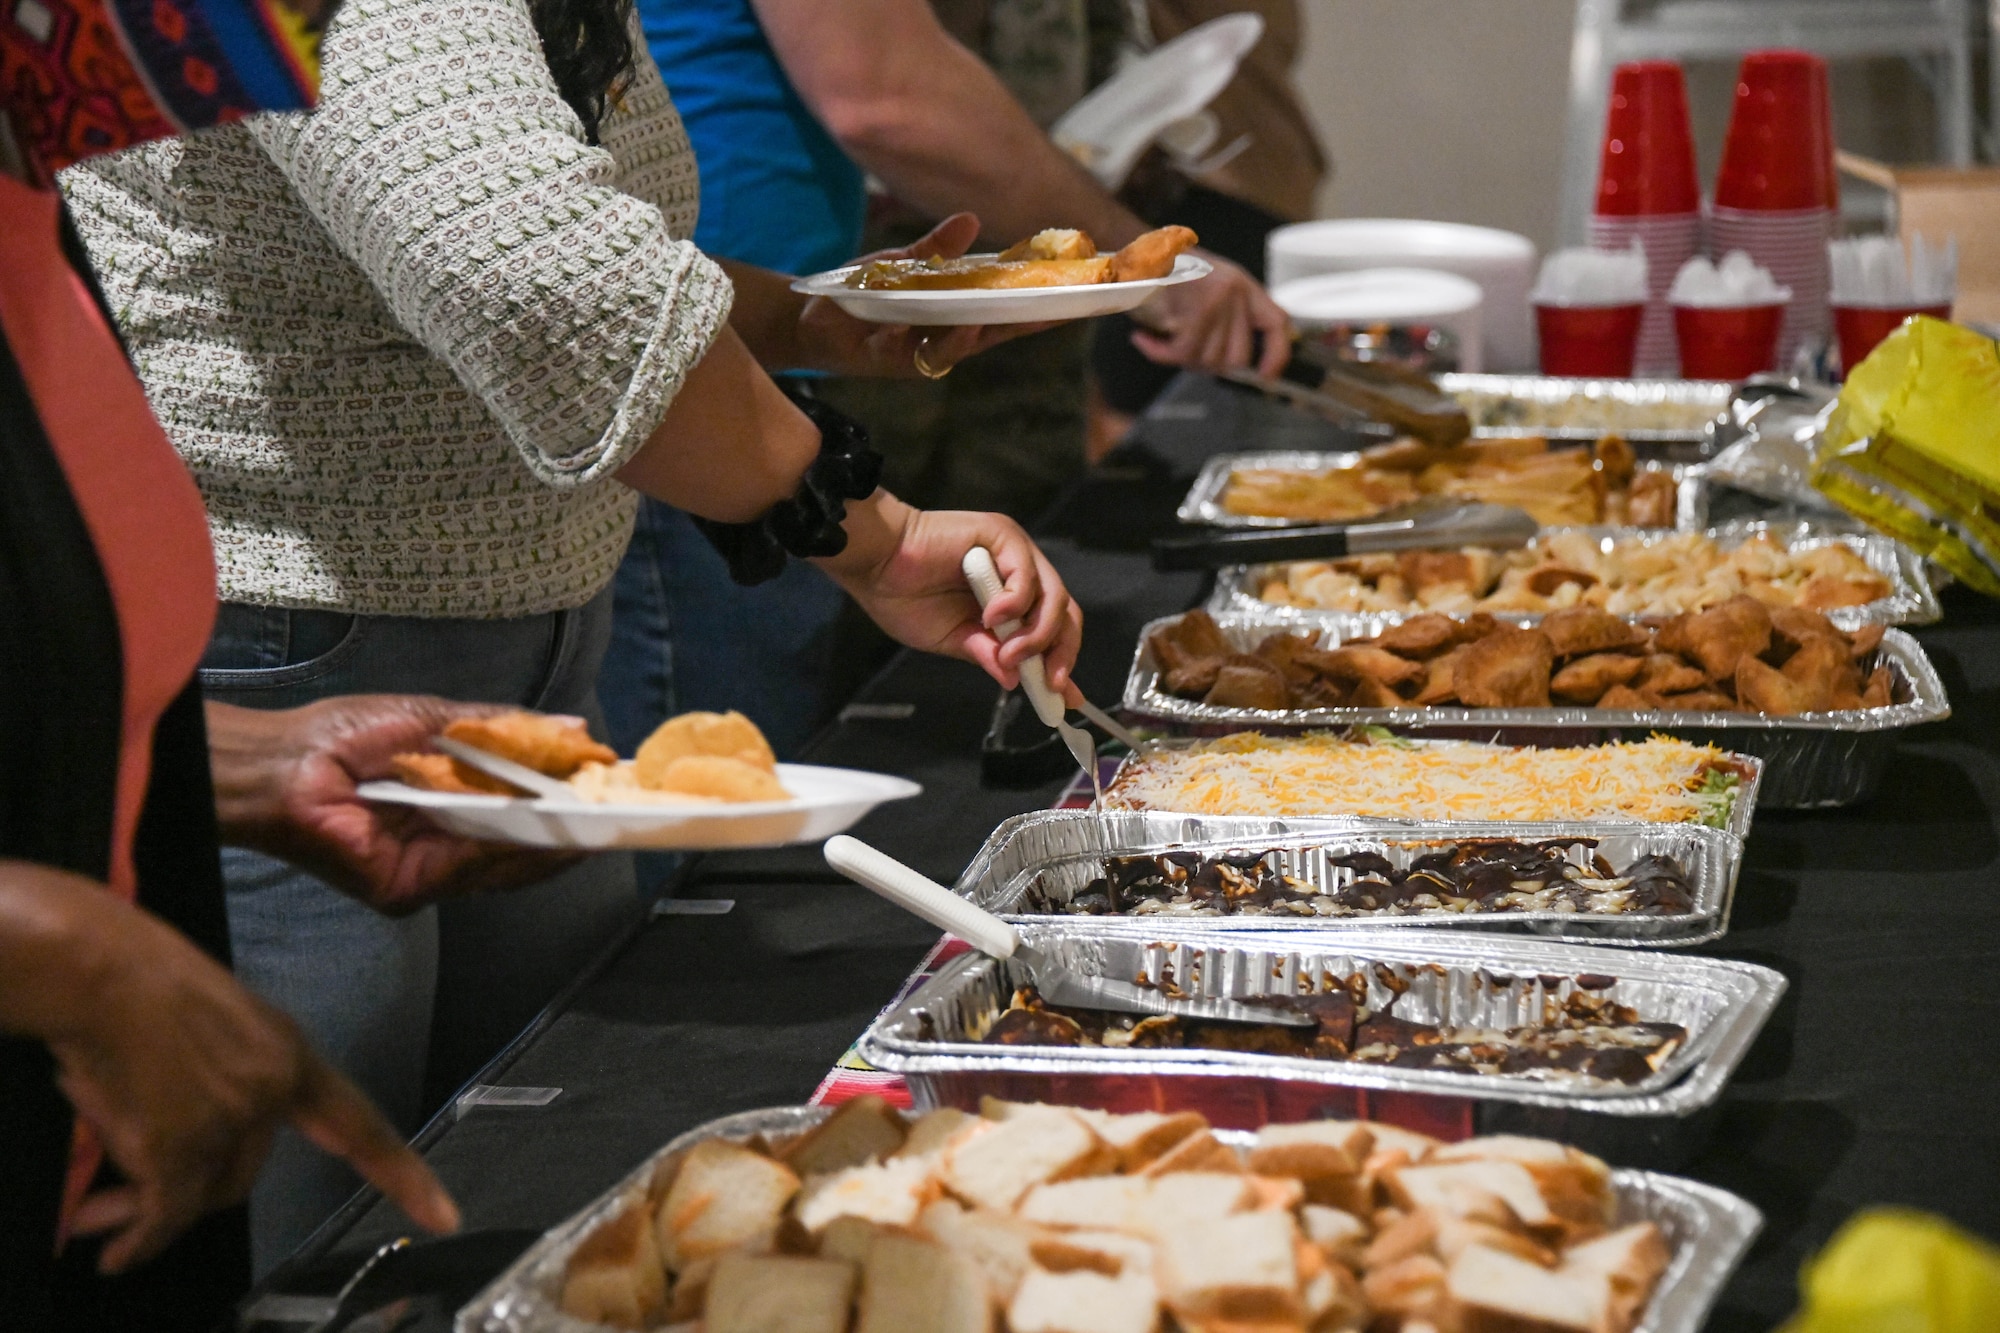 Airmen and families eat an assortment of traditional Hispanic dishes at a fiesta on Altus Air Force Base, Oklahoma, October 15, 2021. Guests were able to enjoy food cooked by several Airmen, which included empanadas, mole, and churros. (U.S. Air Force photo by Airman 1st Class Trenton Jancze)